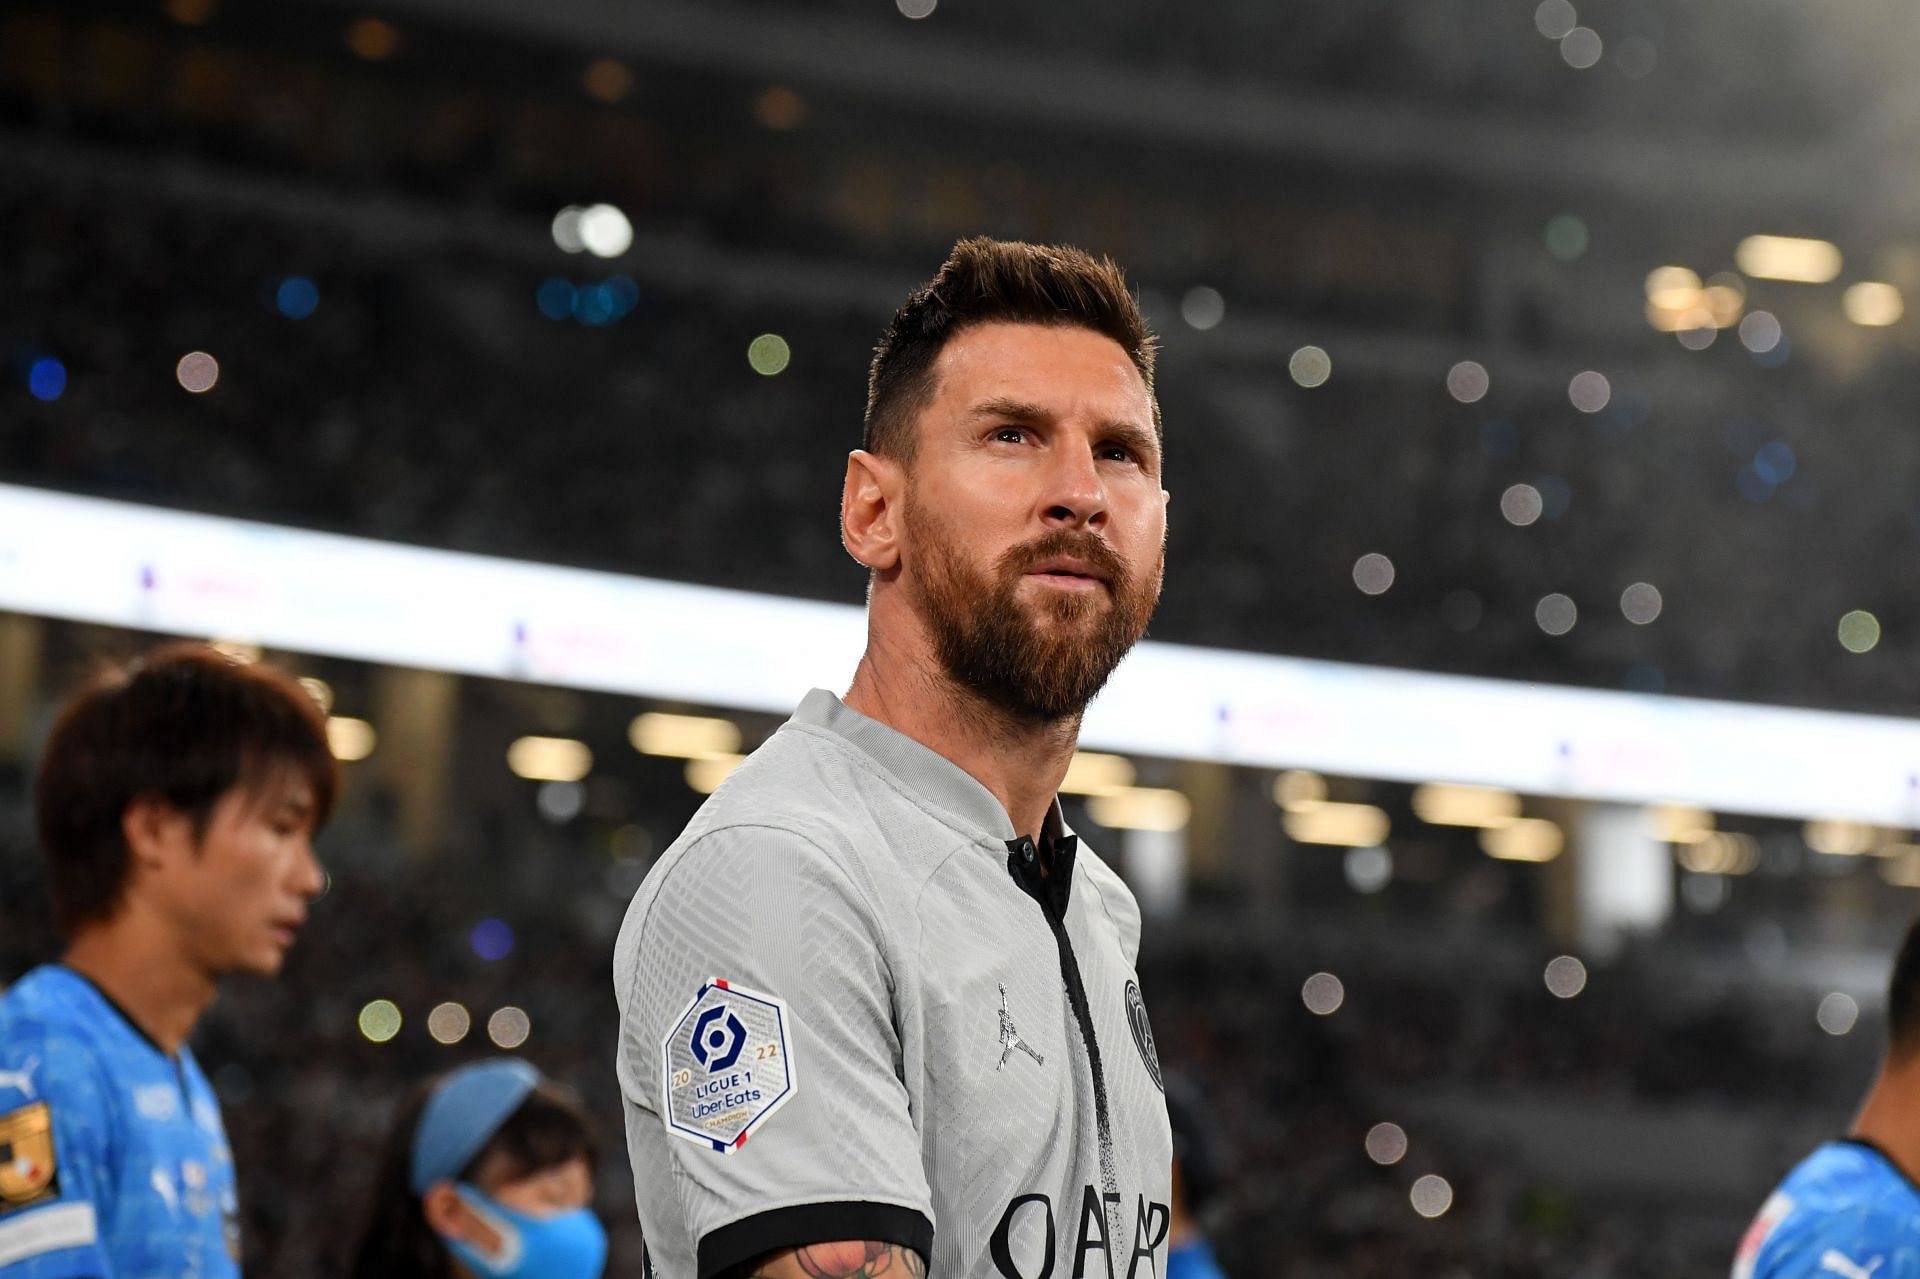 5 reasons why PSG changing Lionel Messi's position makes them favorites to  win the UEFA Champions League this season